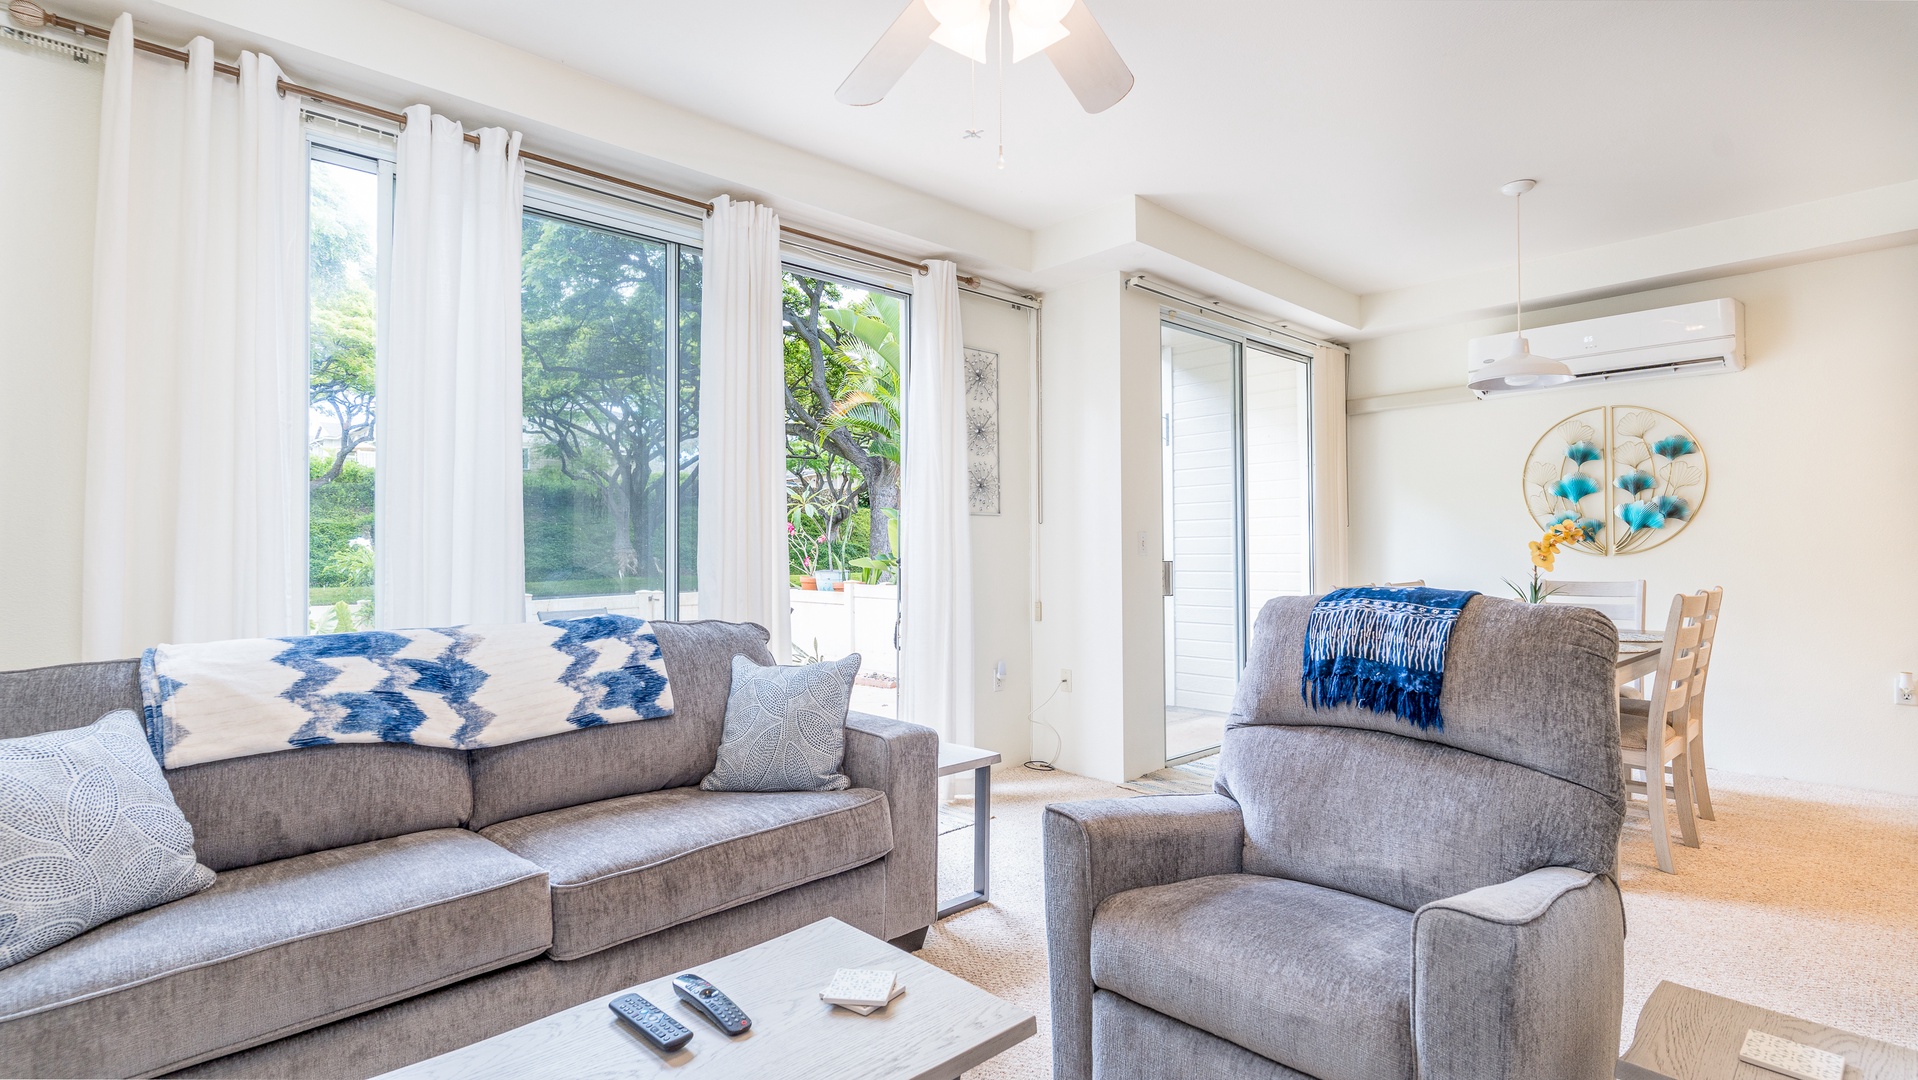 Kapolei Vacation Rentals, Fairways at Ko Olina 27H - Watch your favorite TV show on the flat screen or take in the island breeze from the lanai.